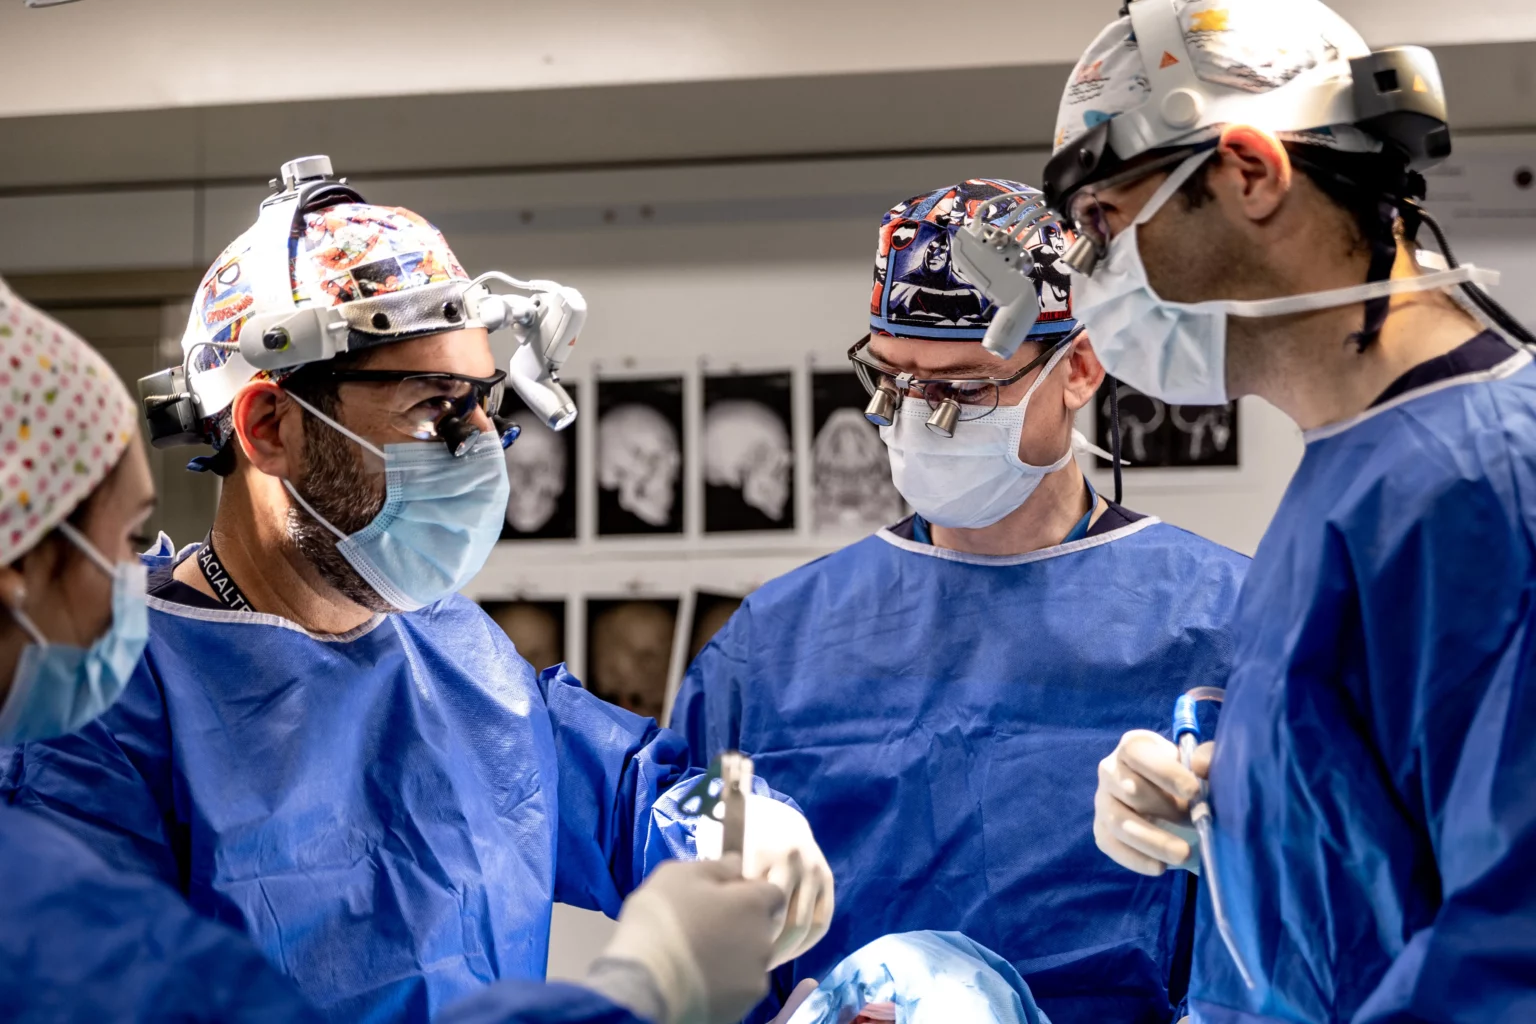 Skullpture surgeons during a forehead reconstruction surgery.